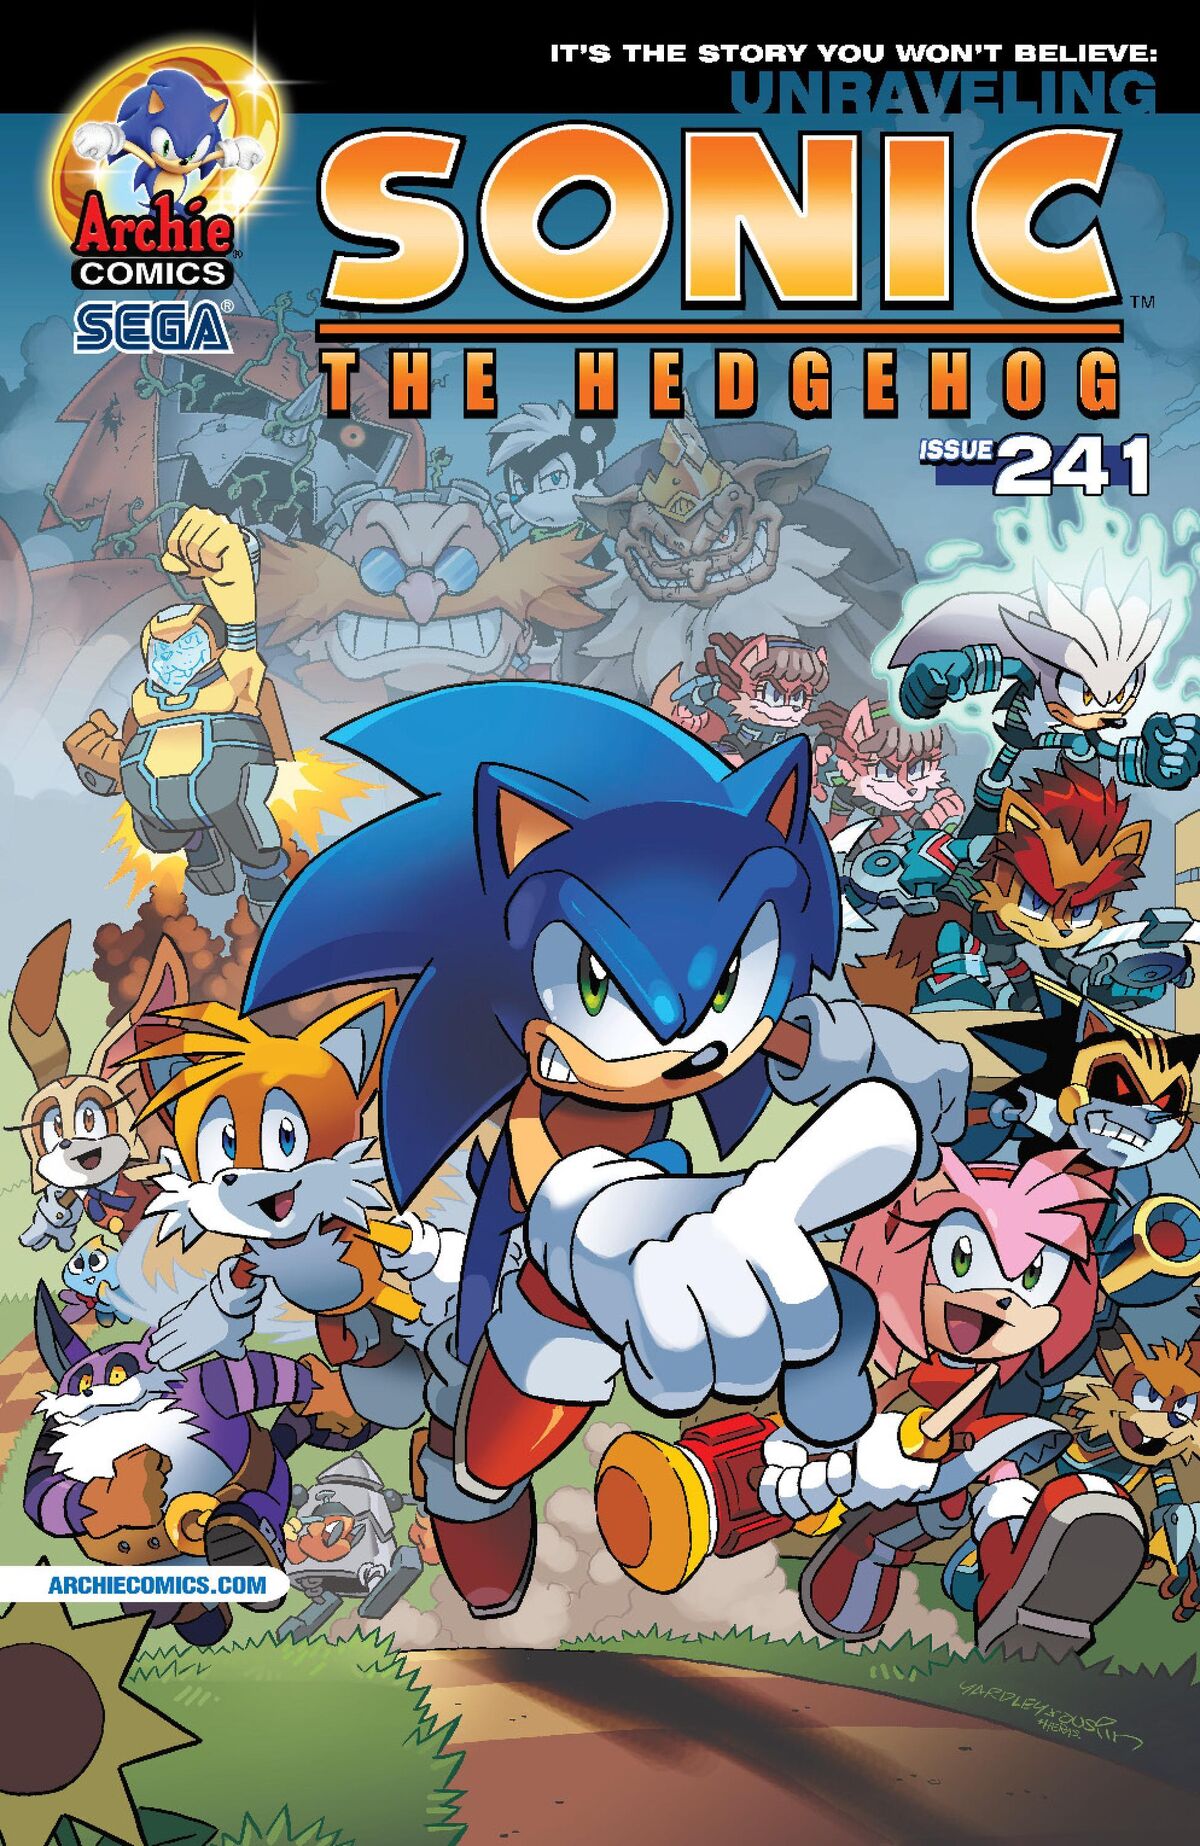 Sonic The Hedgeblog — Mighty's lost it, from Archie's 'Sonic The